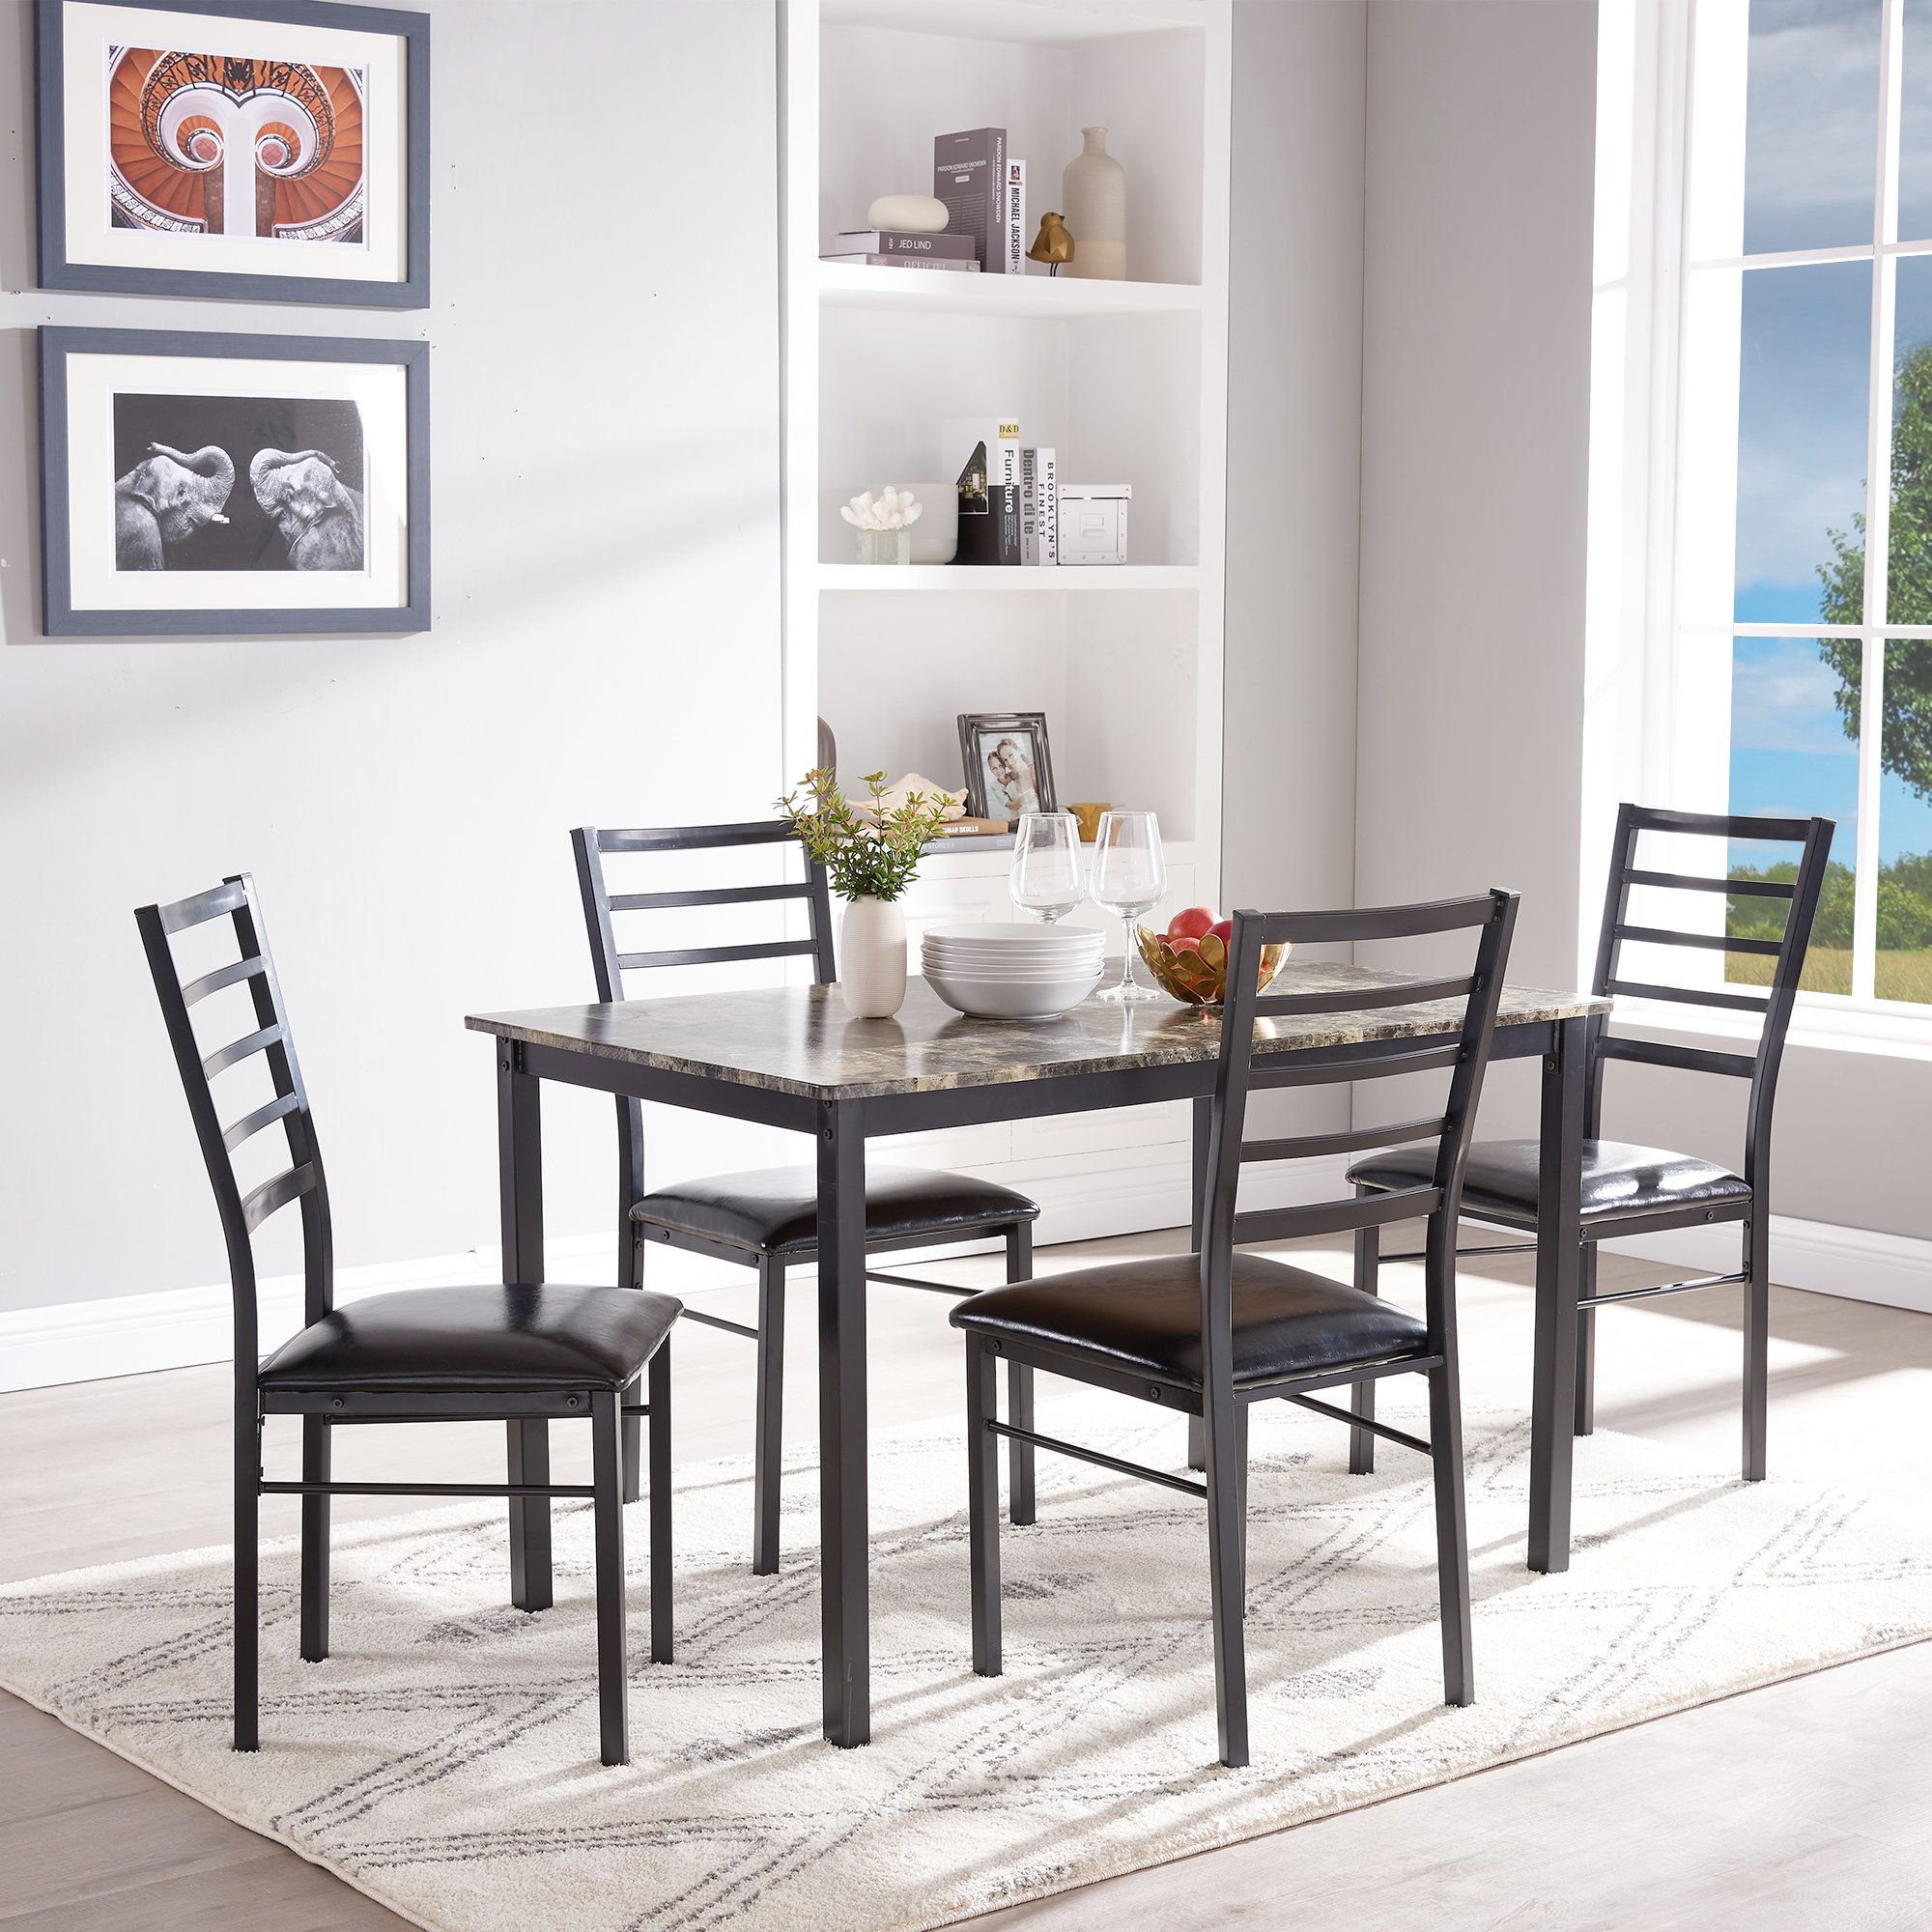 Mukai 5 Piece Dining Set Within Most Current Maynard 5 Piece Dining Sets (View 6 of 20)